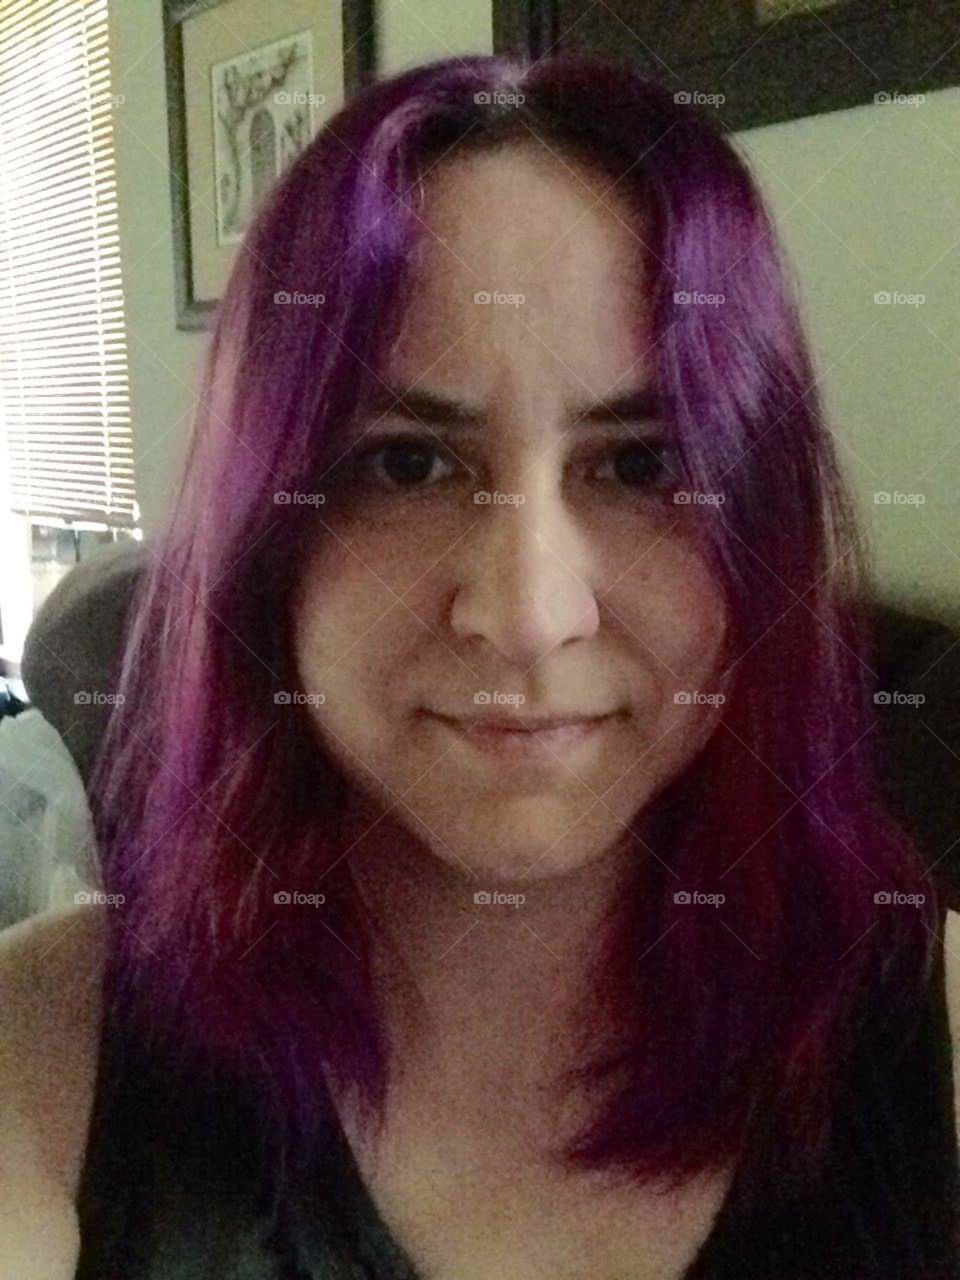 Right after I dyed my hair purple...it came out pink.